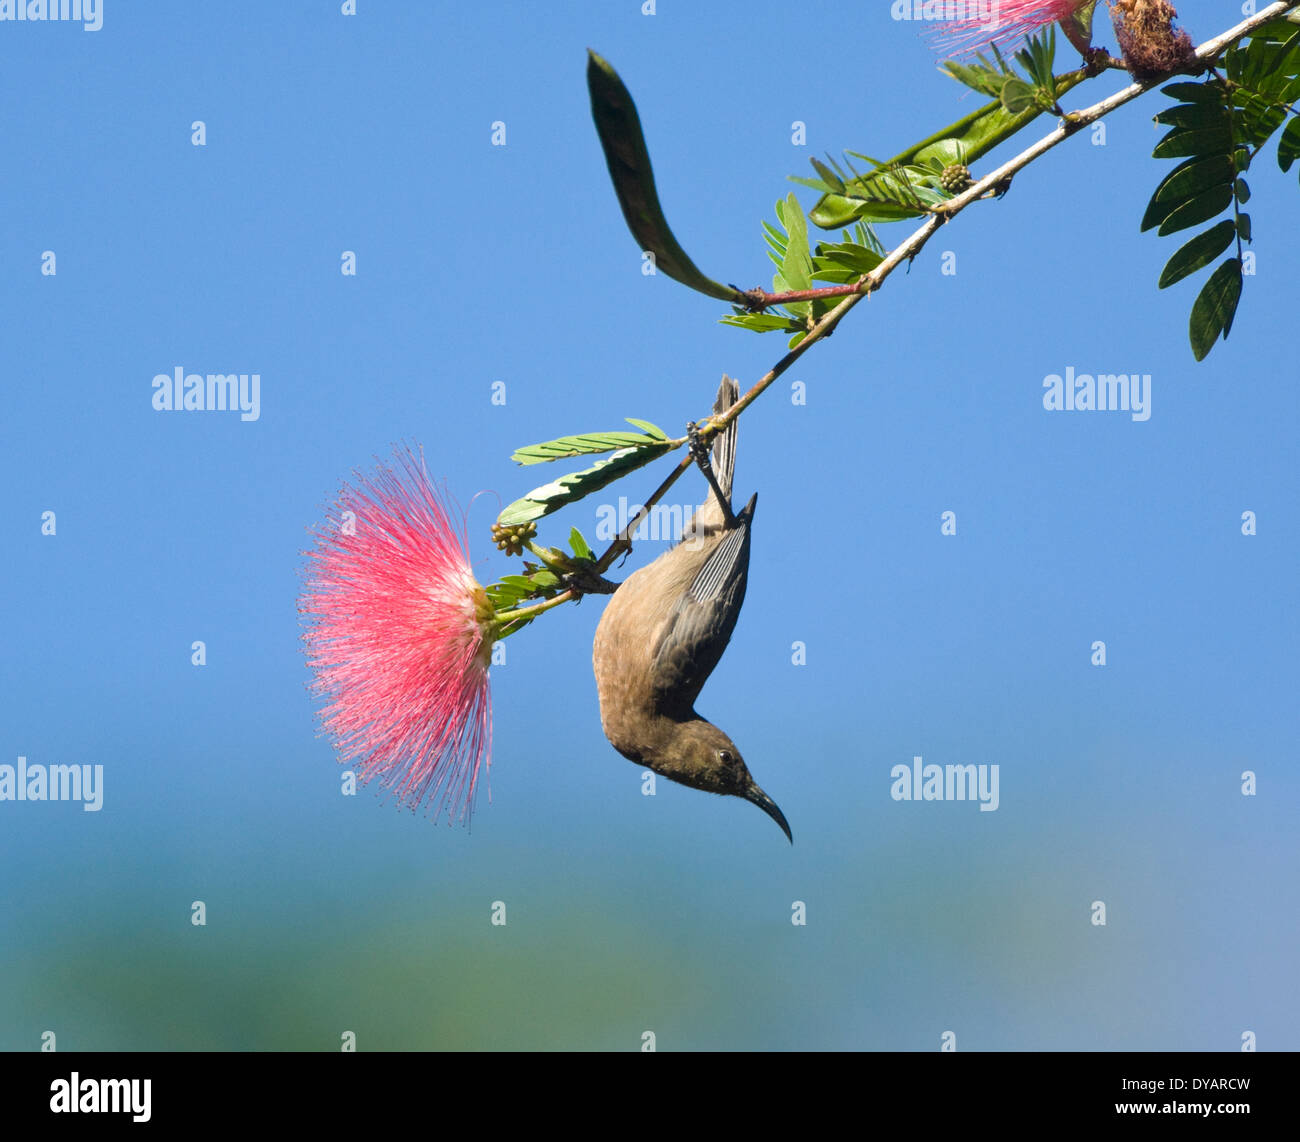 Dusky Honeyeater (Myzomela obscura) upturned on a branch with Myrtaceae flowers, Queensland, Australia Stock Photo